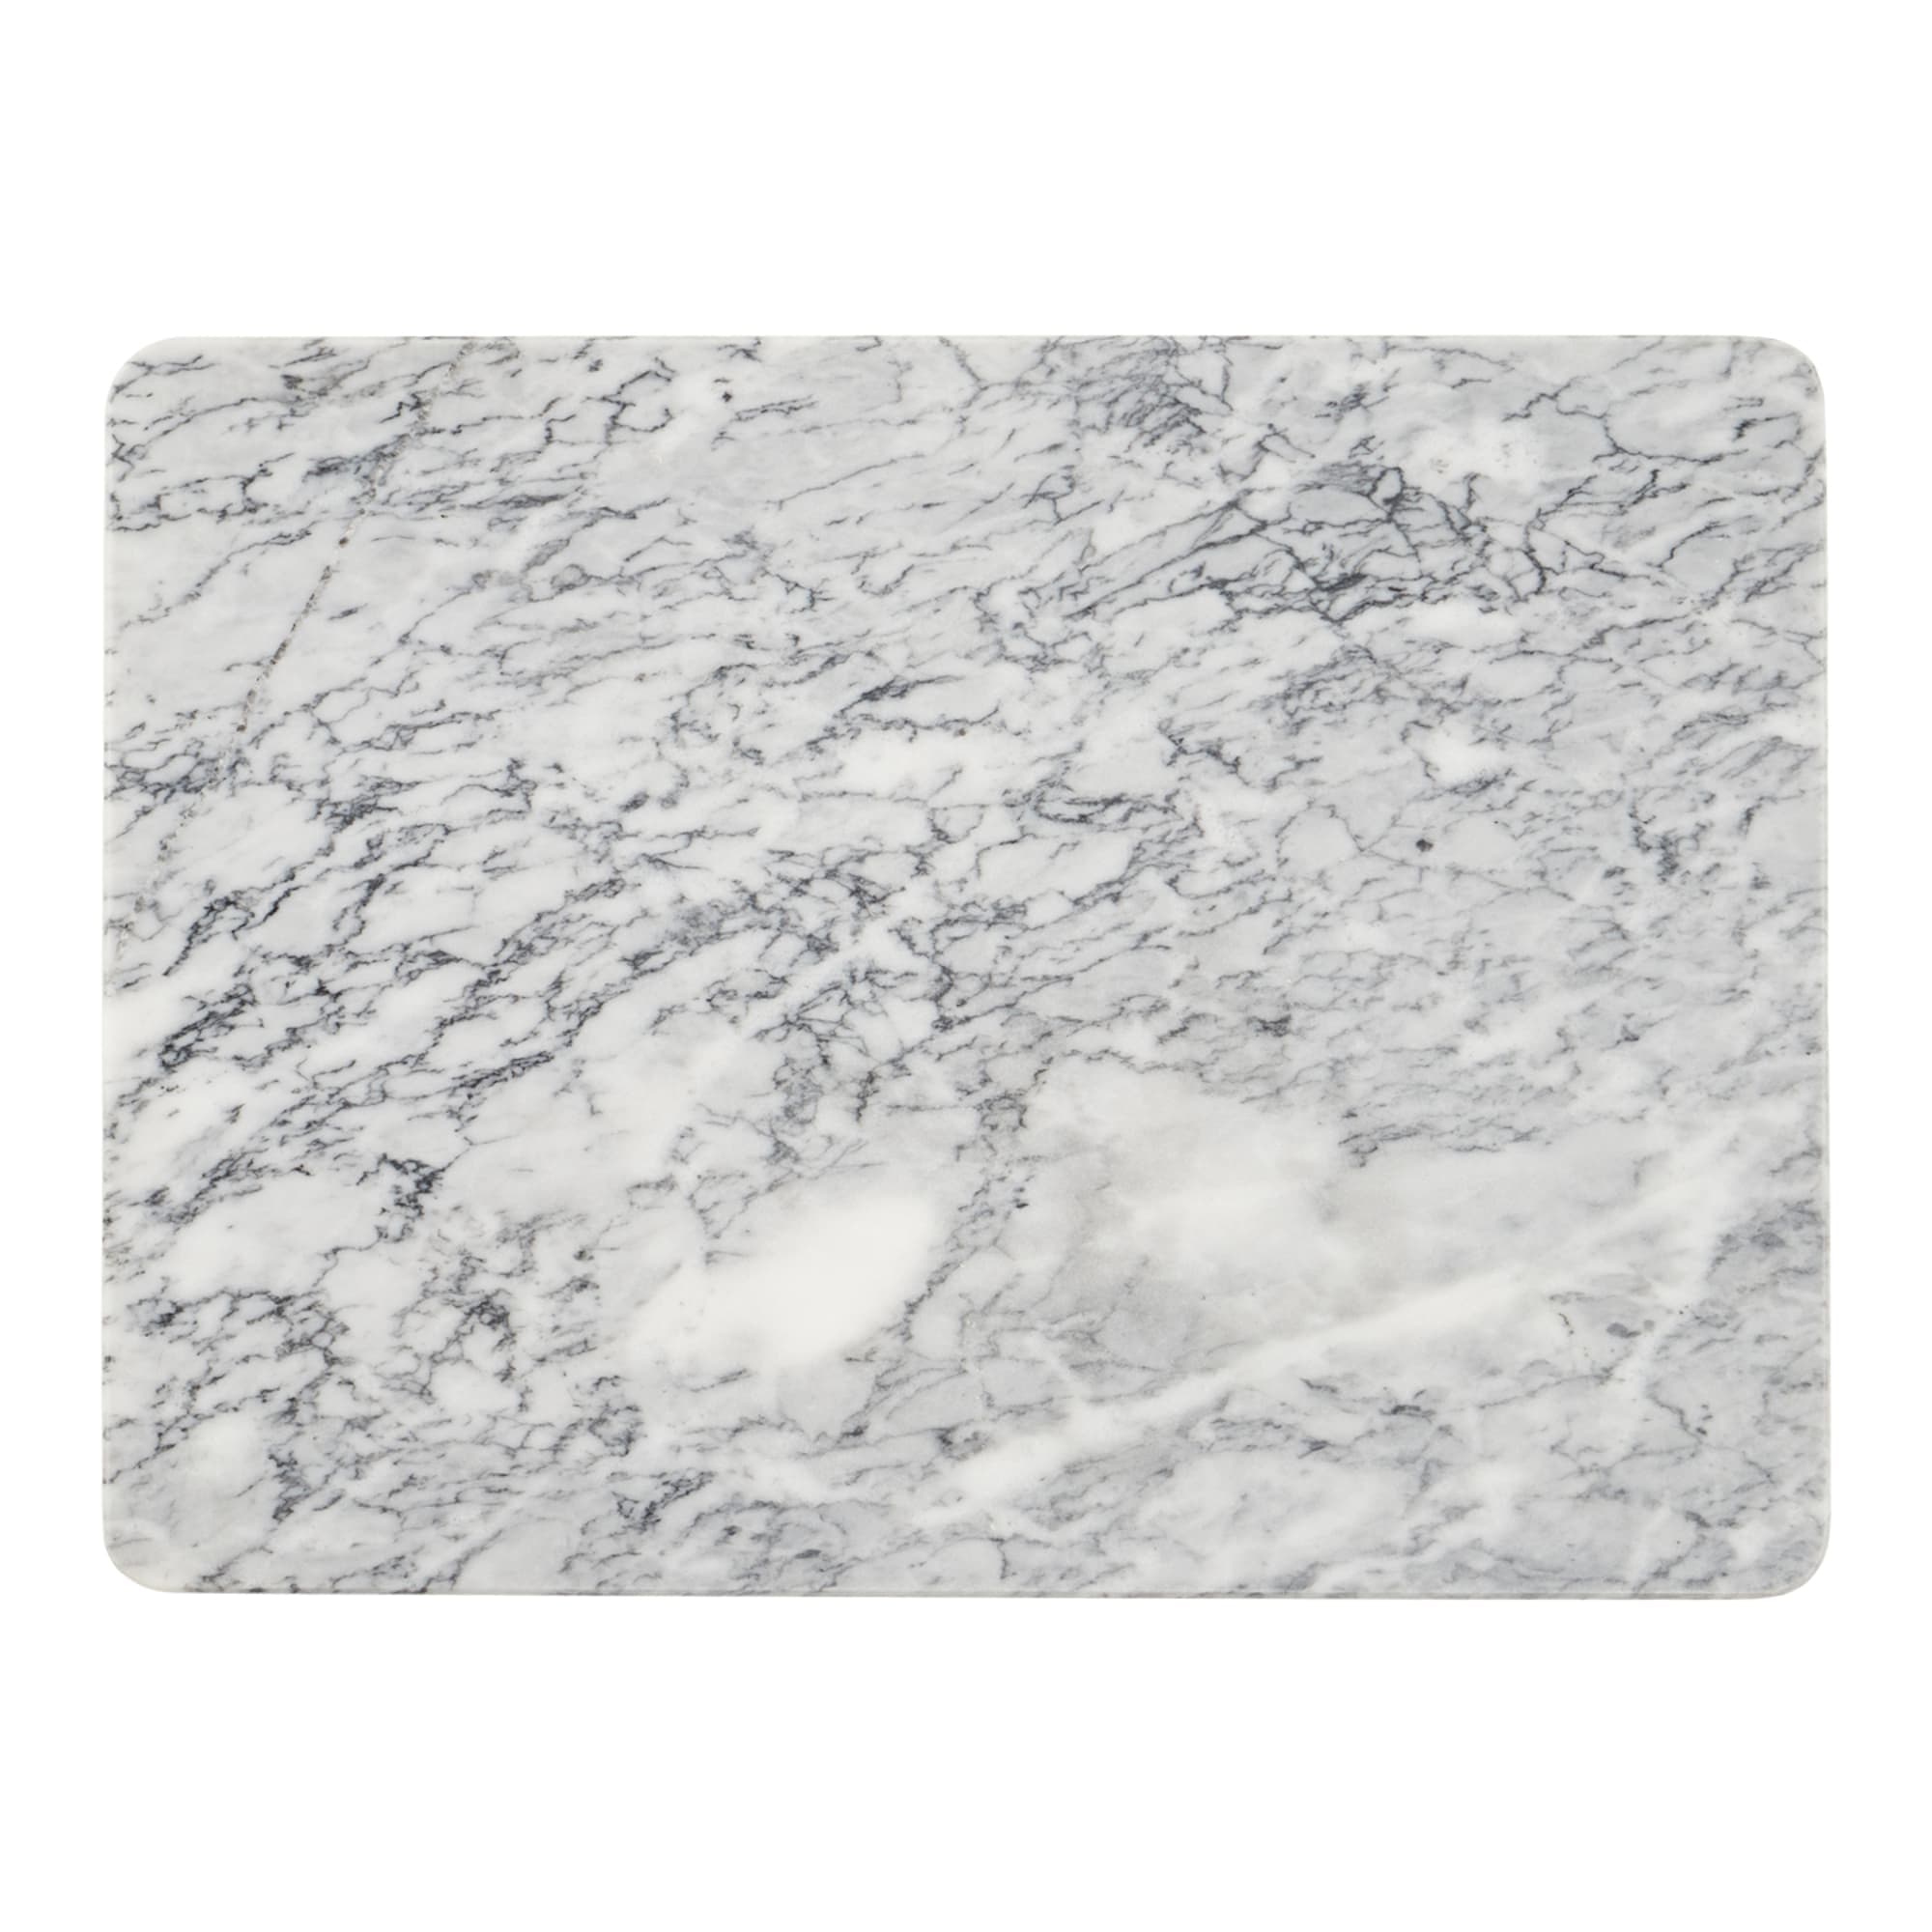 Home Basics Multi-Purpose Pastry Marble Cutting Board, White $15.00 EACH, CASE PACK OF 4